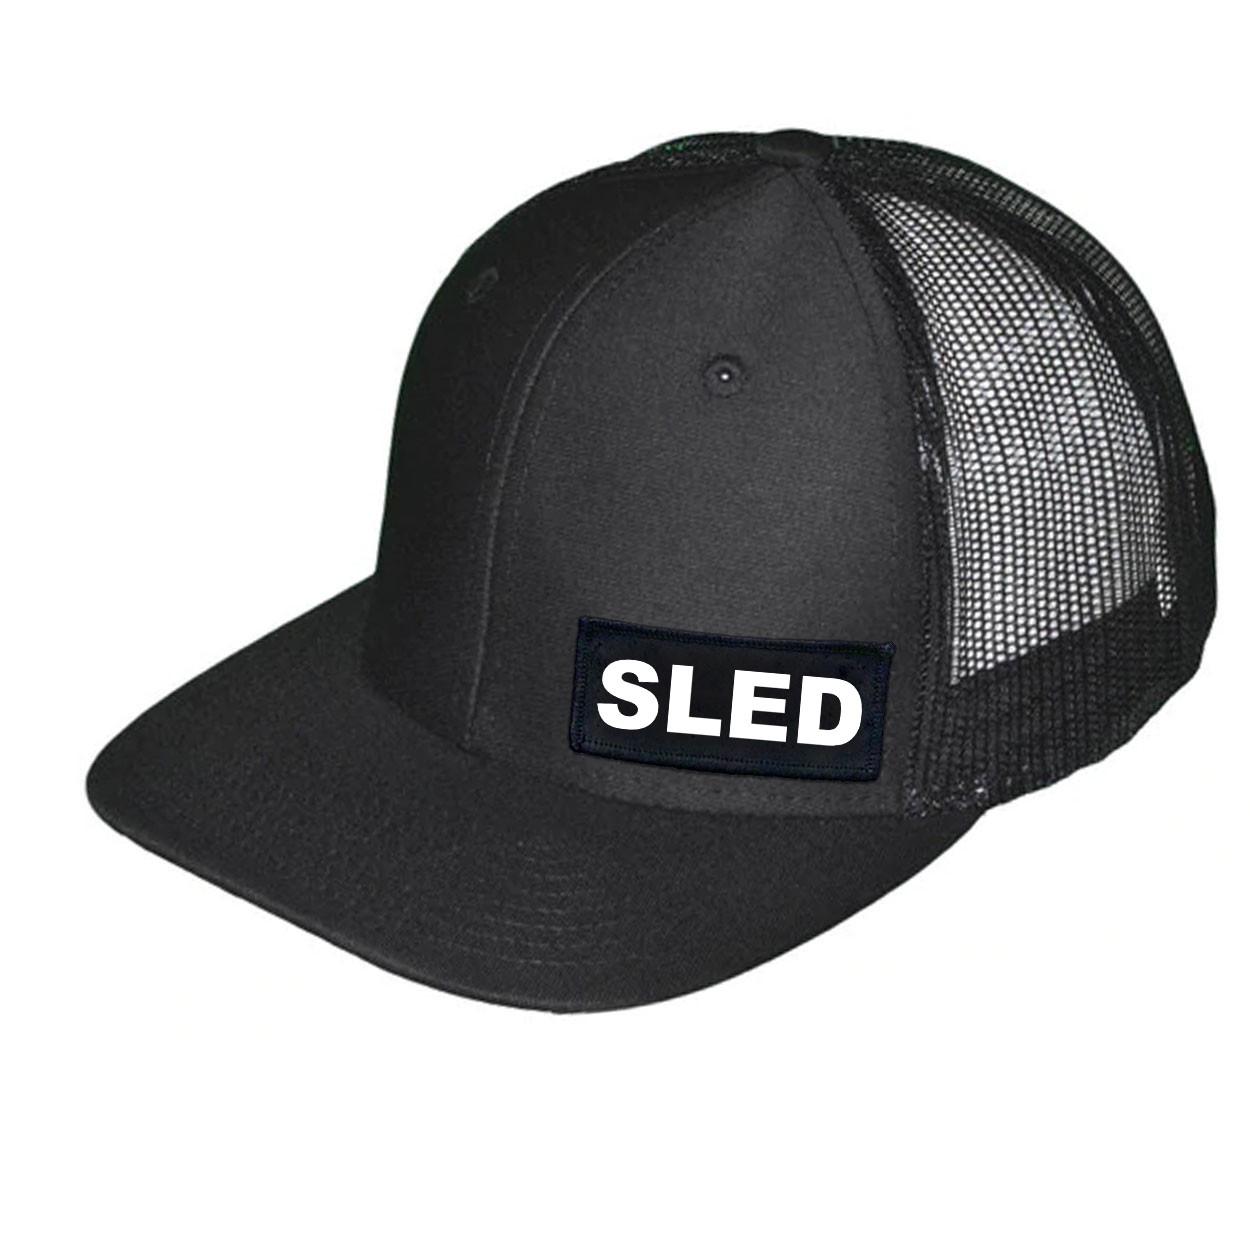 Sled Brand Logo Night Out Woven Patch Snapback Trucker Hat Black